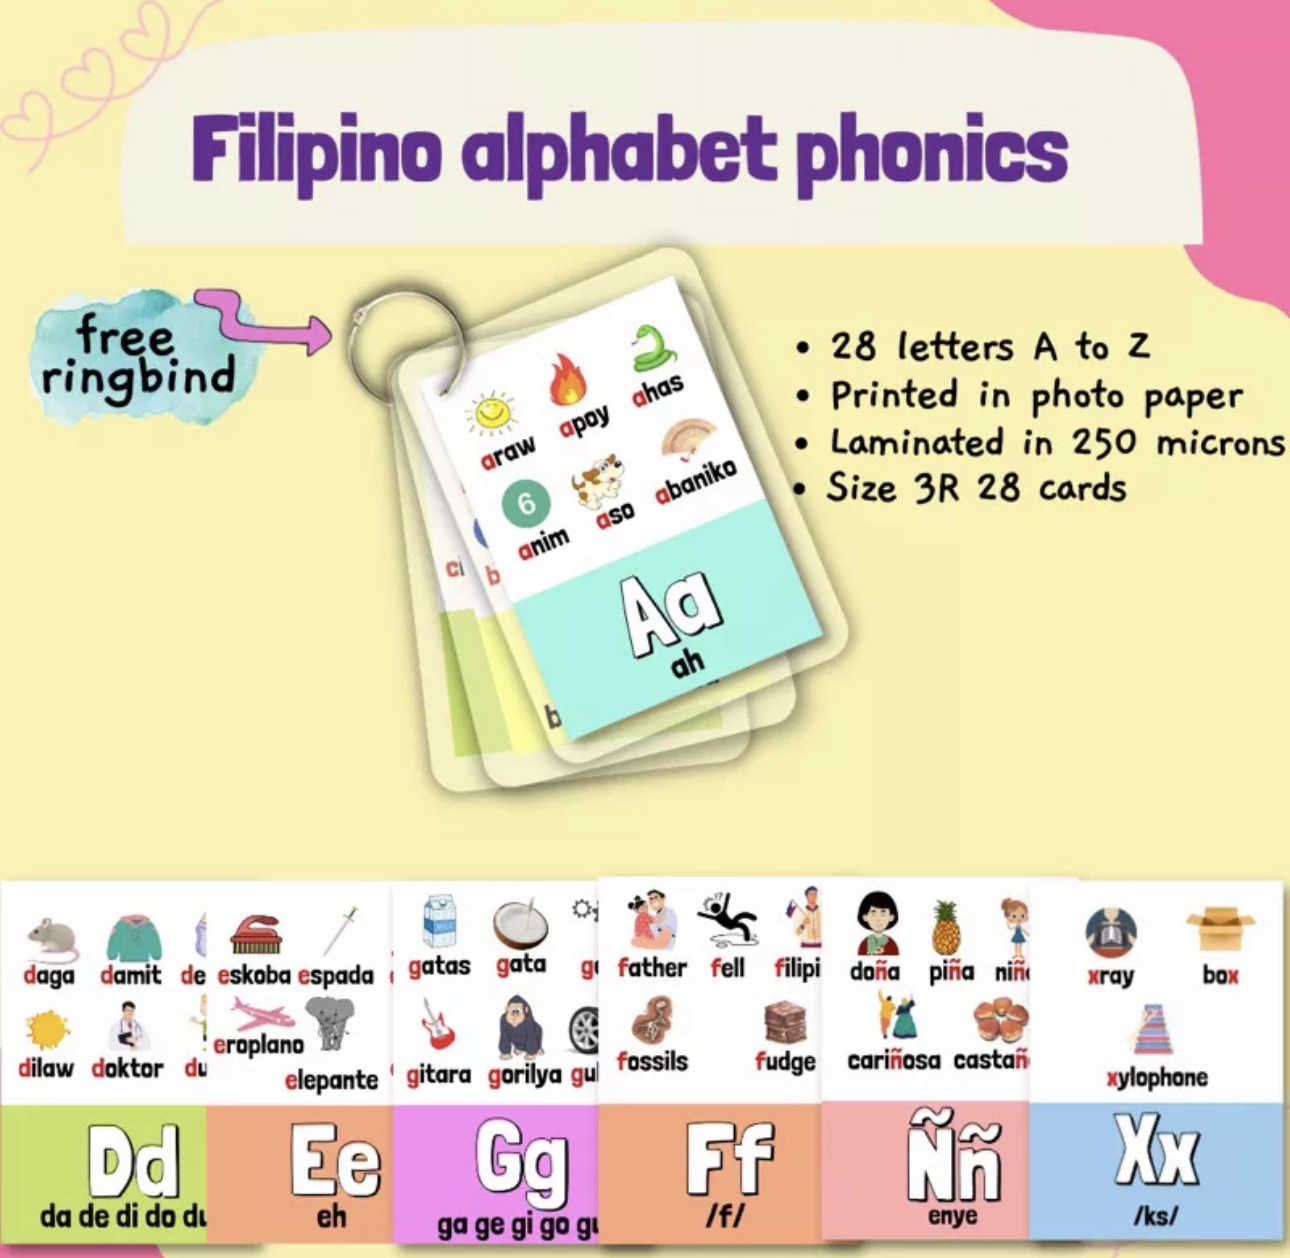 What Are The Borrowed Letters In Filipino Alphabet